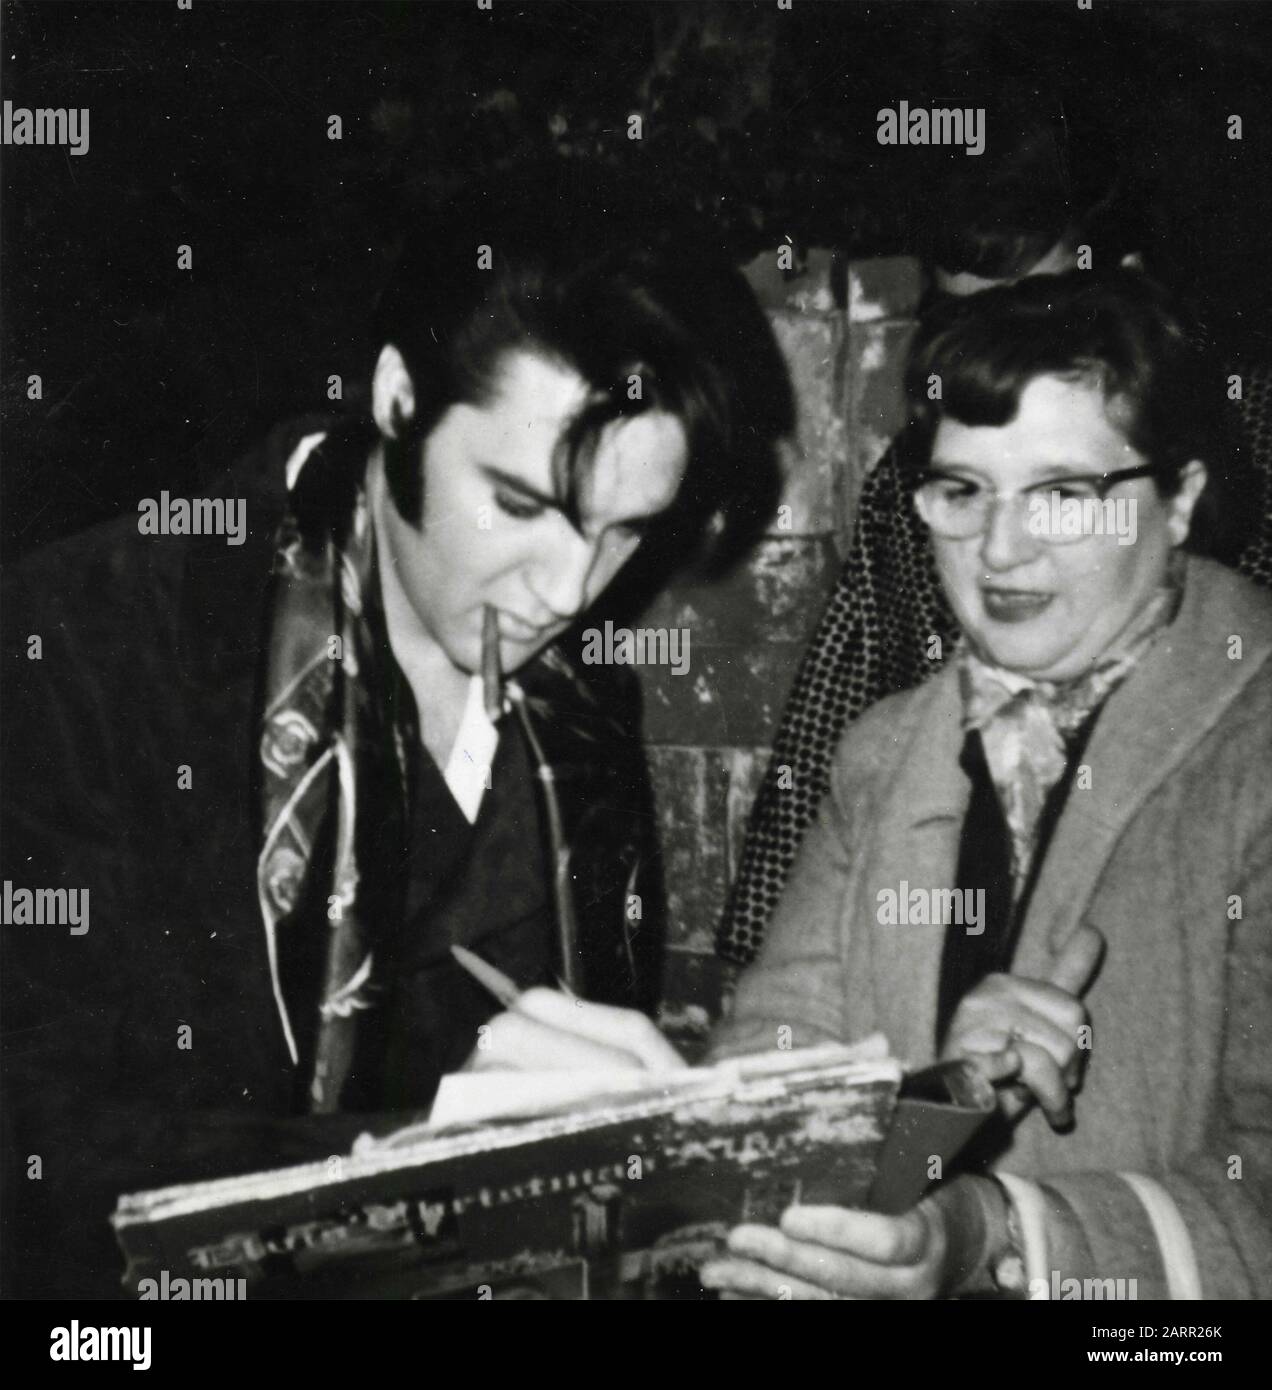 American singer and actor Elvis Presley signing autographs to fans, USA 1950s Stock Photo